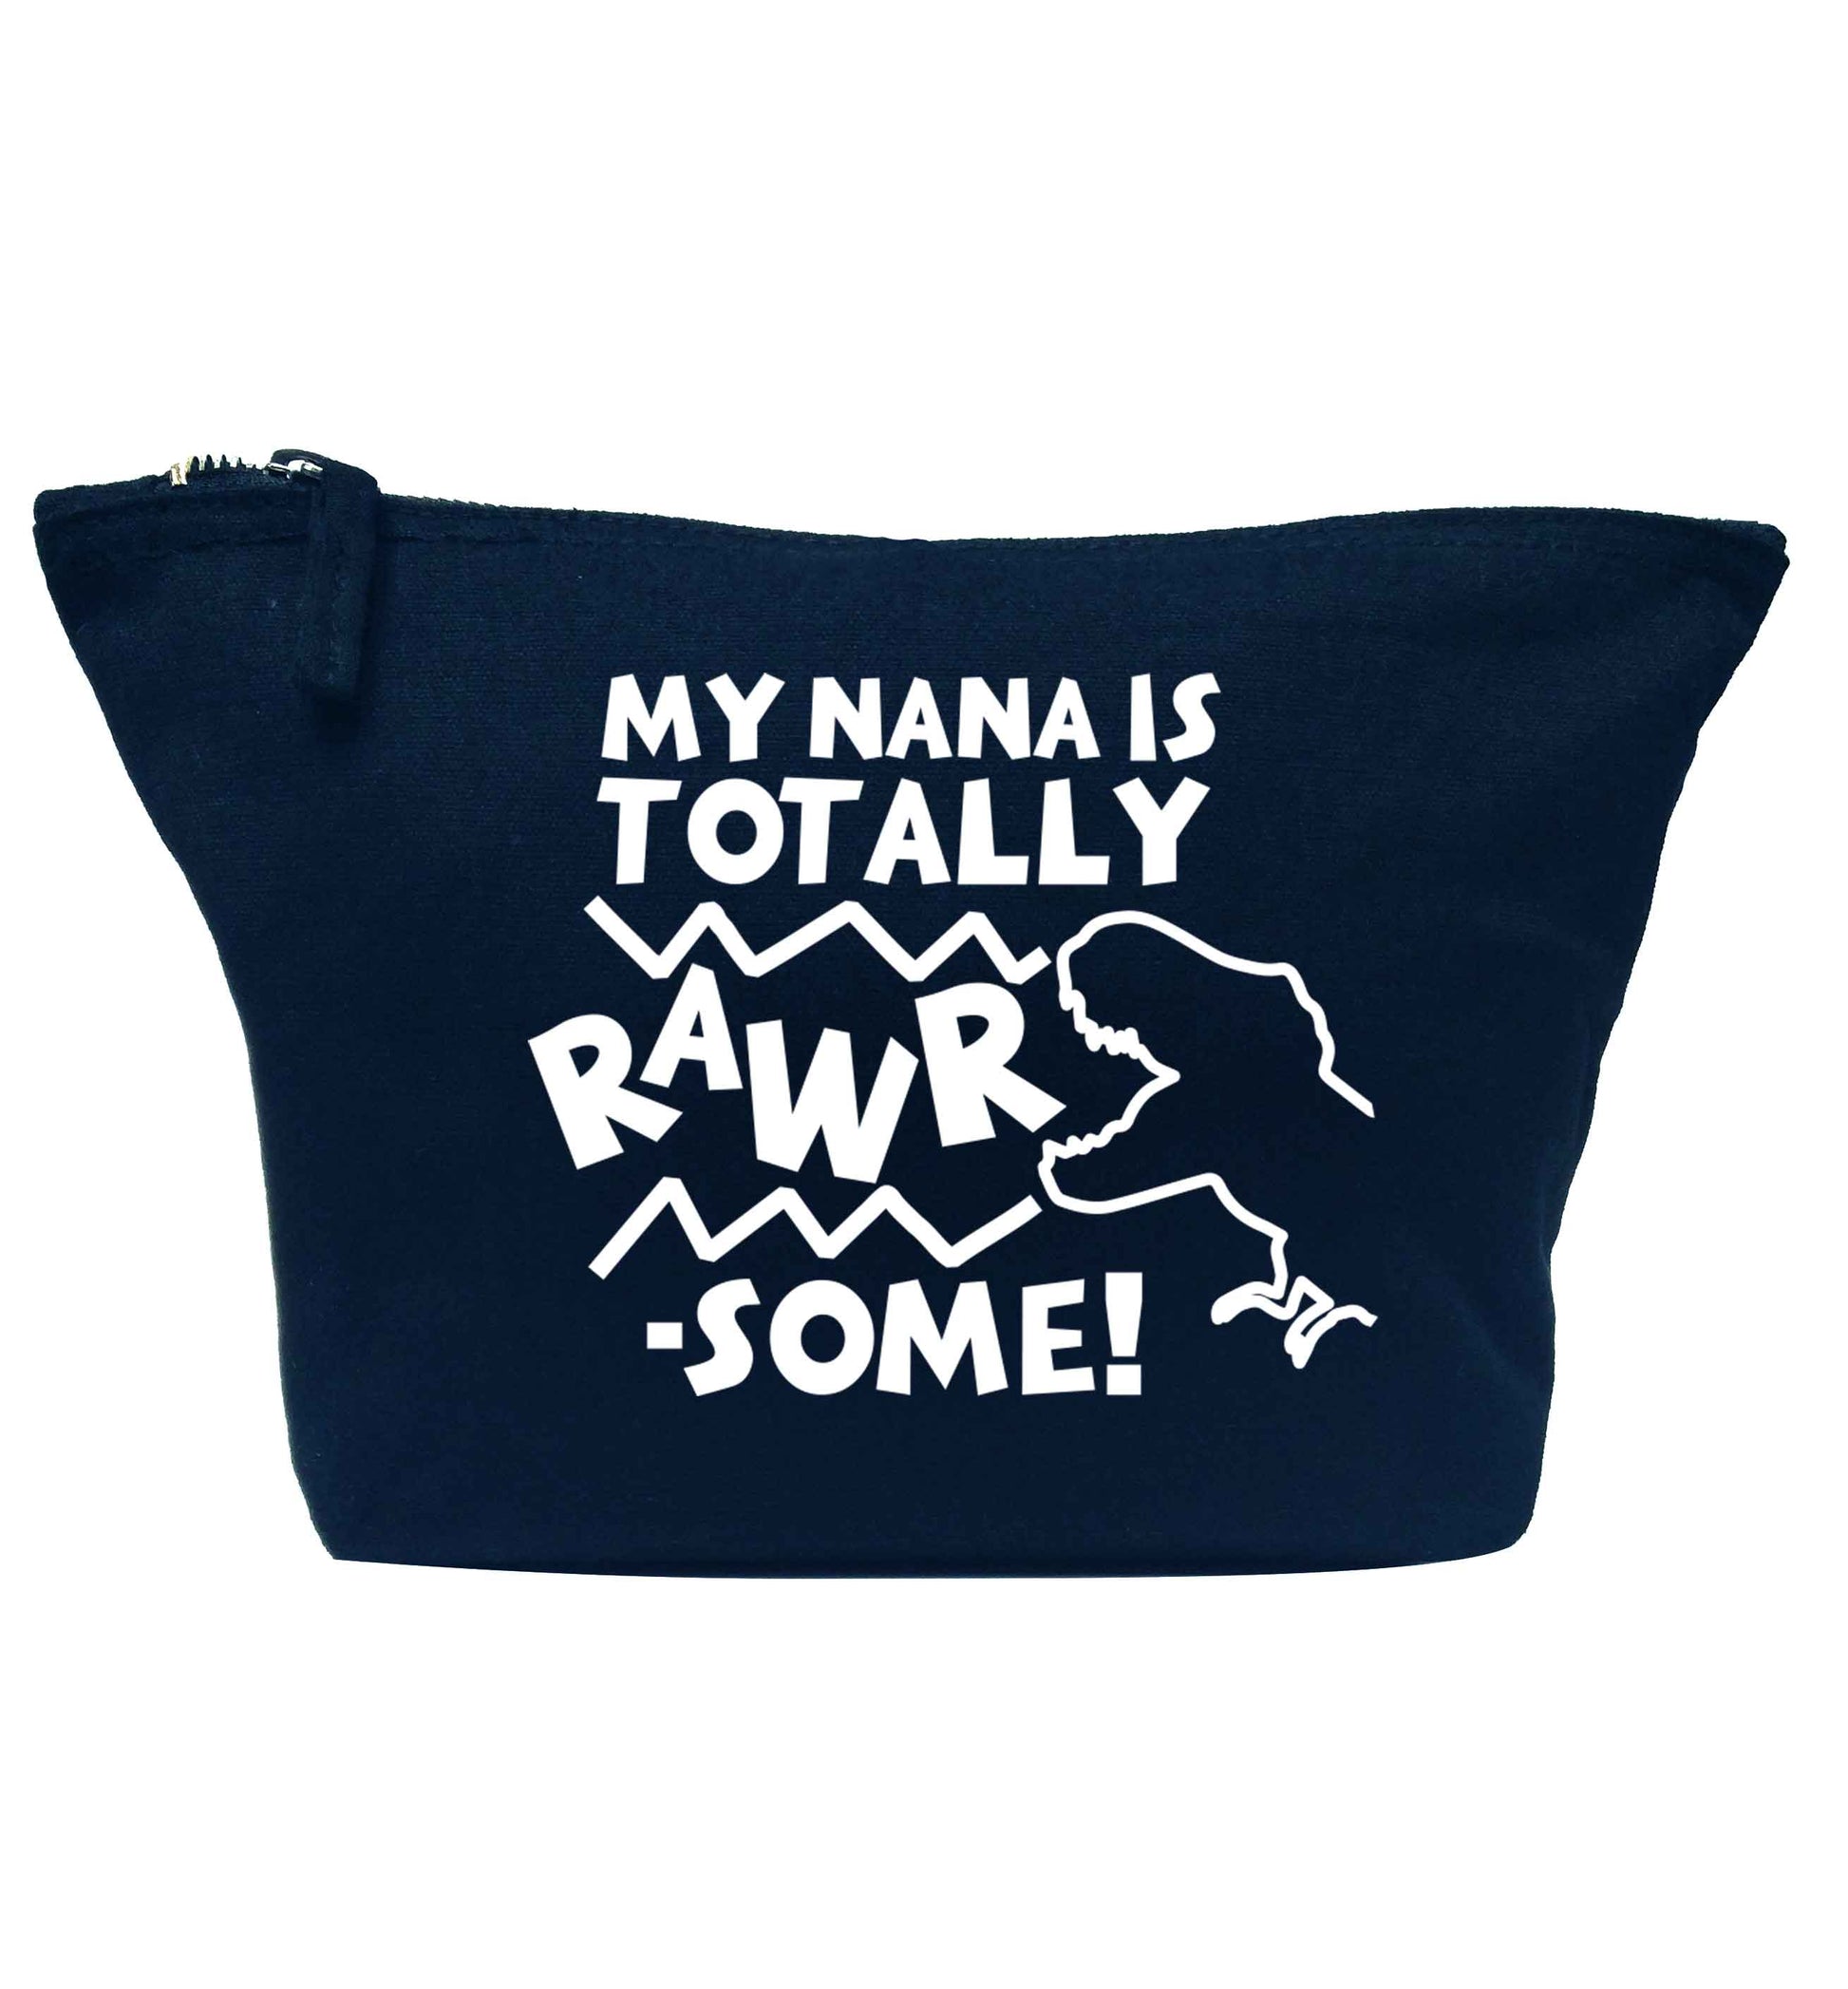 My nana is totally rawrsome navy makeup bag